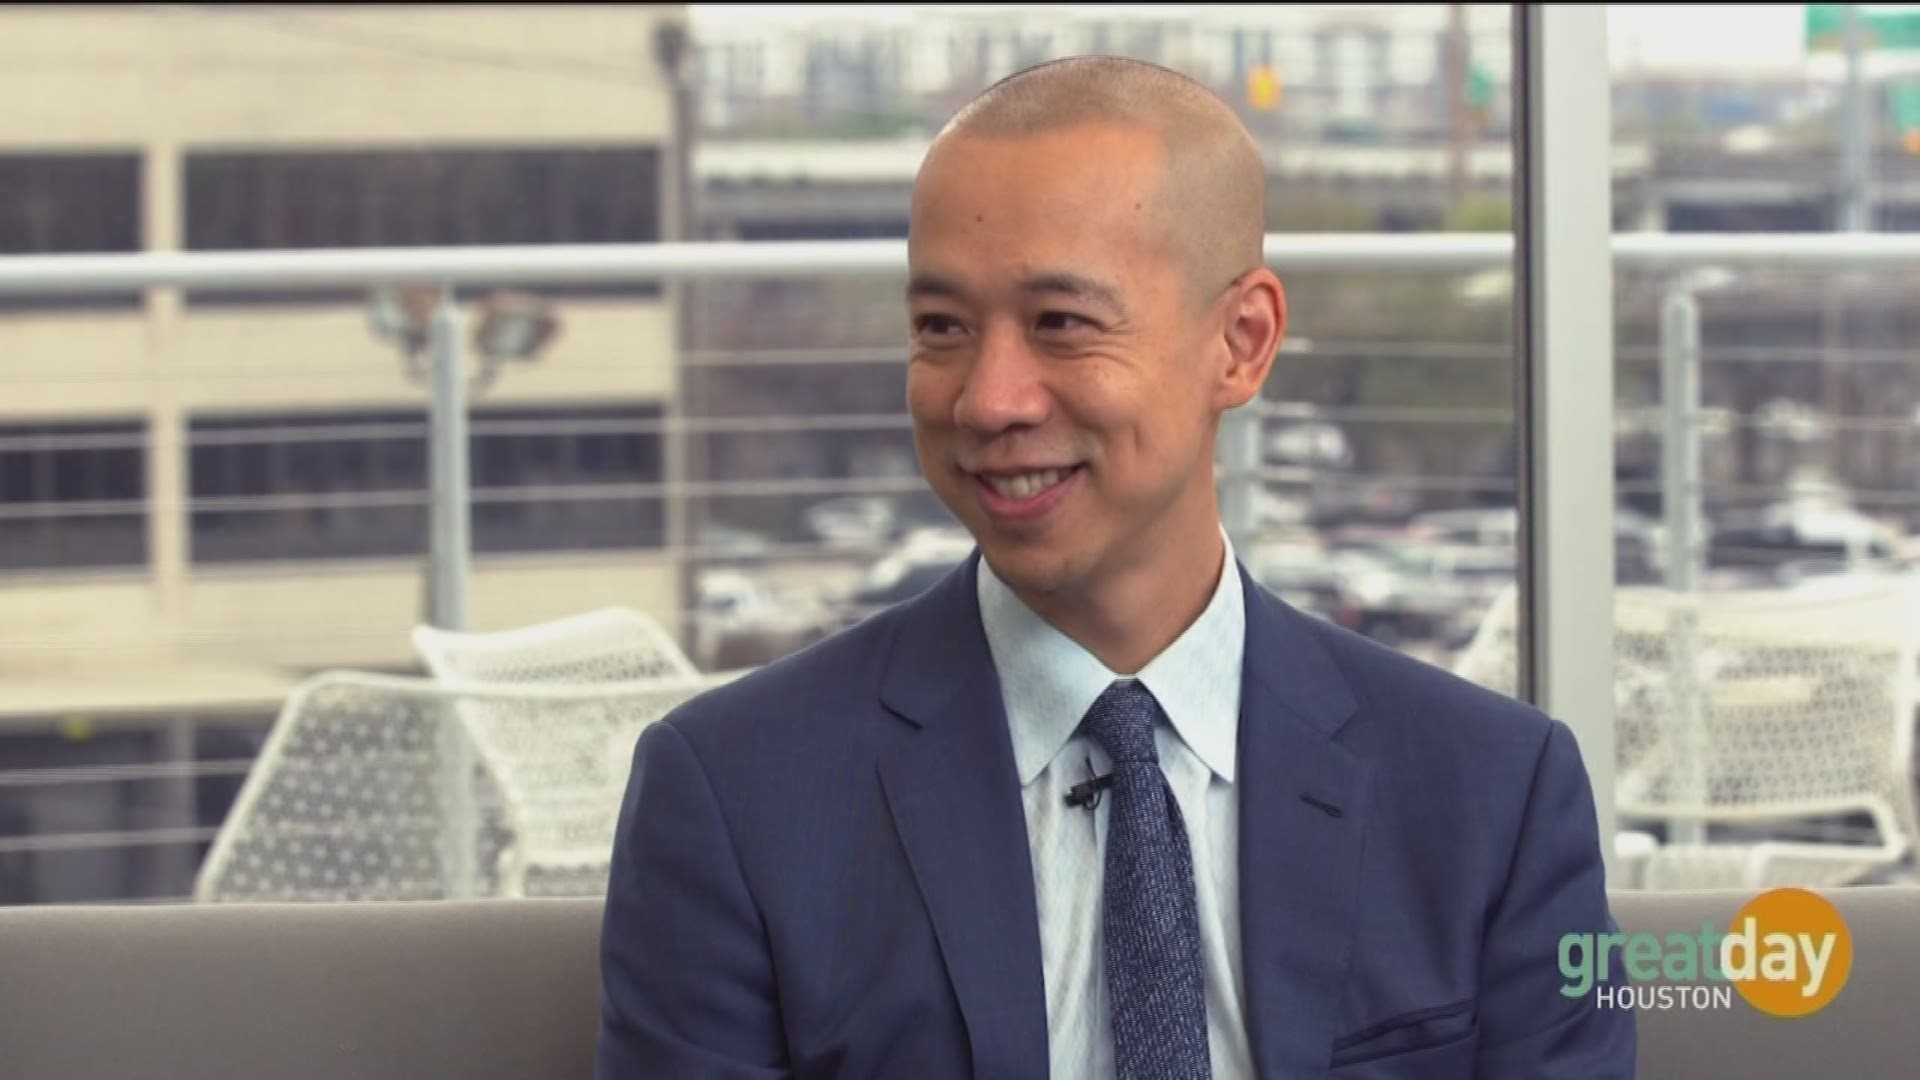 Cardiothoracic surgeon Dr. Tom Nguyen shares how a minimally invasive treatment can help get the heart pumping normally.